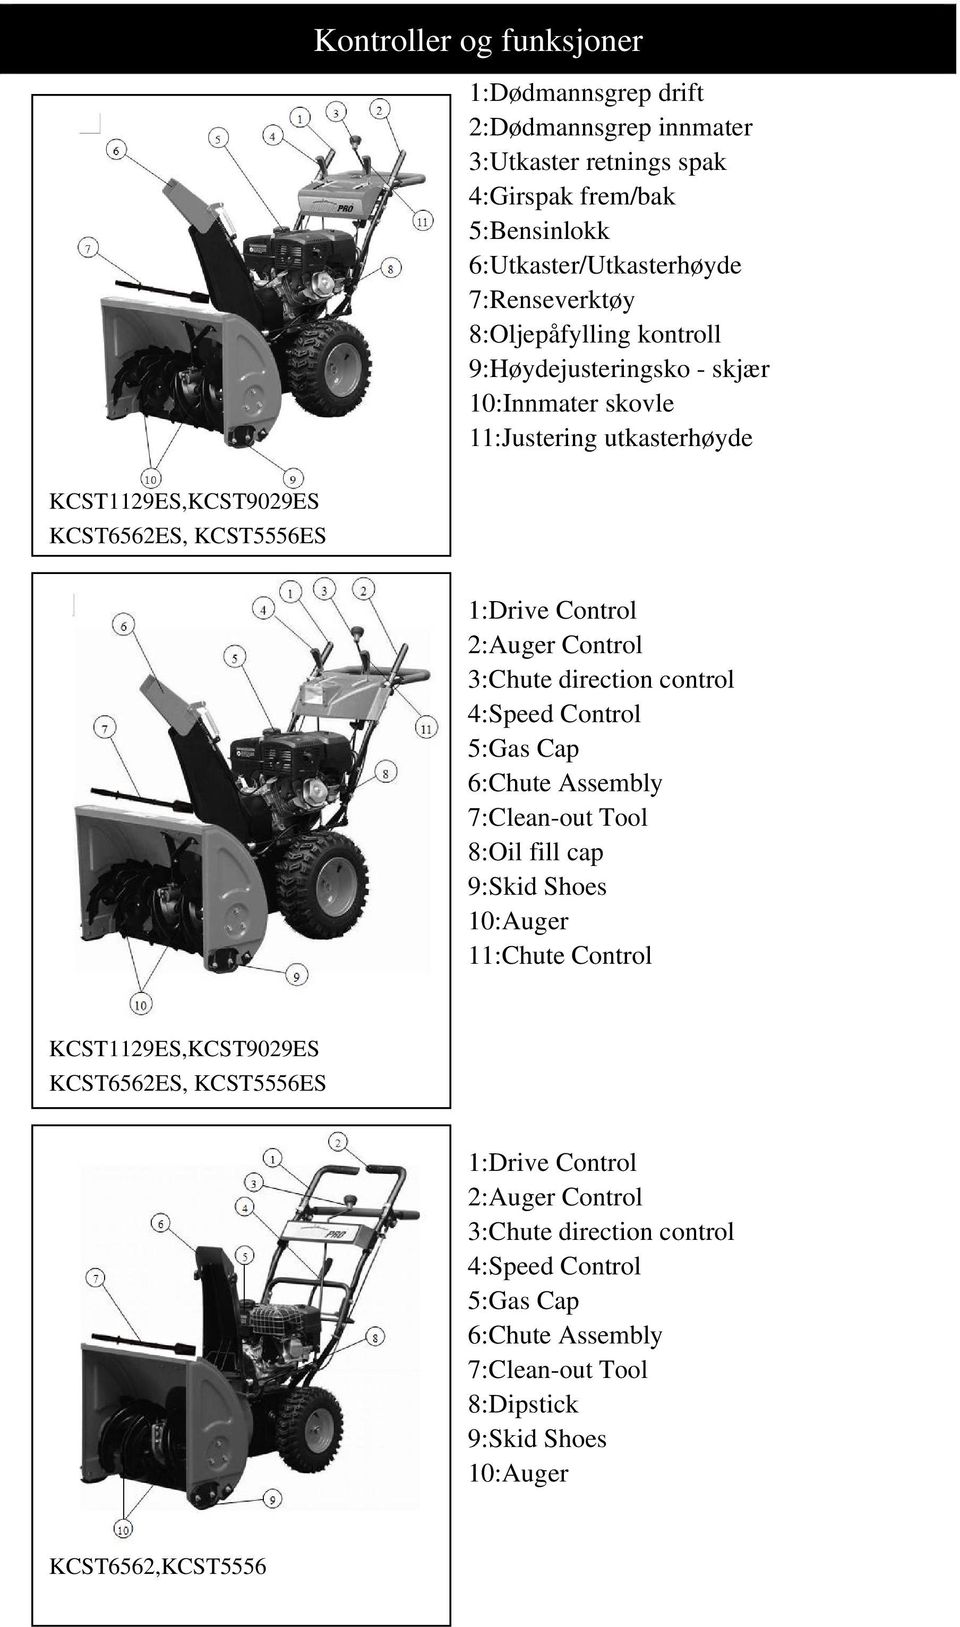 Control 3:Chute direction control 4:Speed Control 5:Gas Cap 6:Chute Assembly 7:Clean-out Tool 8:Oil fill cap 9:Skid Shoes 10:Auger 11:Chute Control KCST1129ES,KCST9029ES